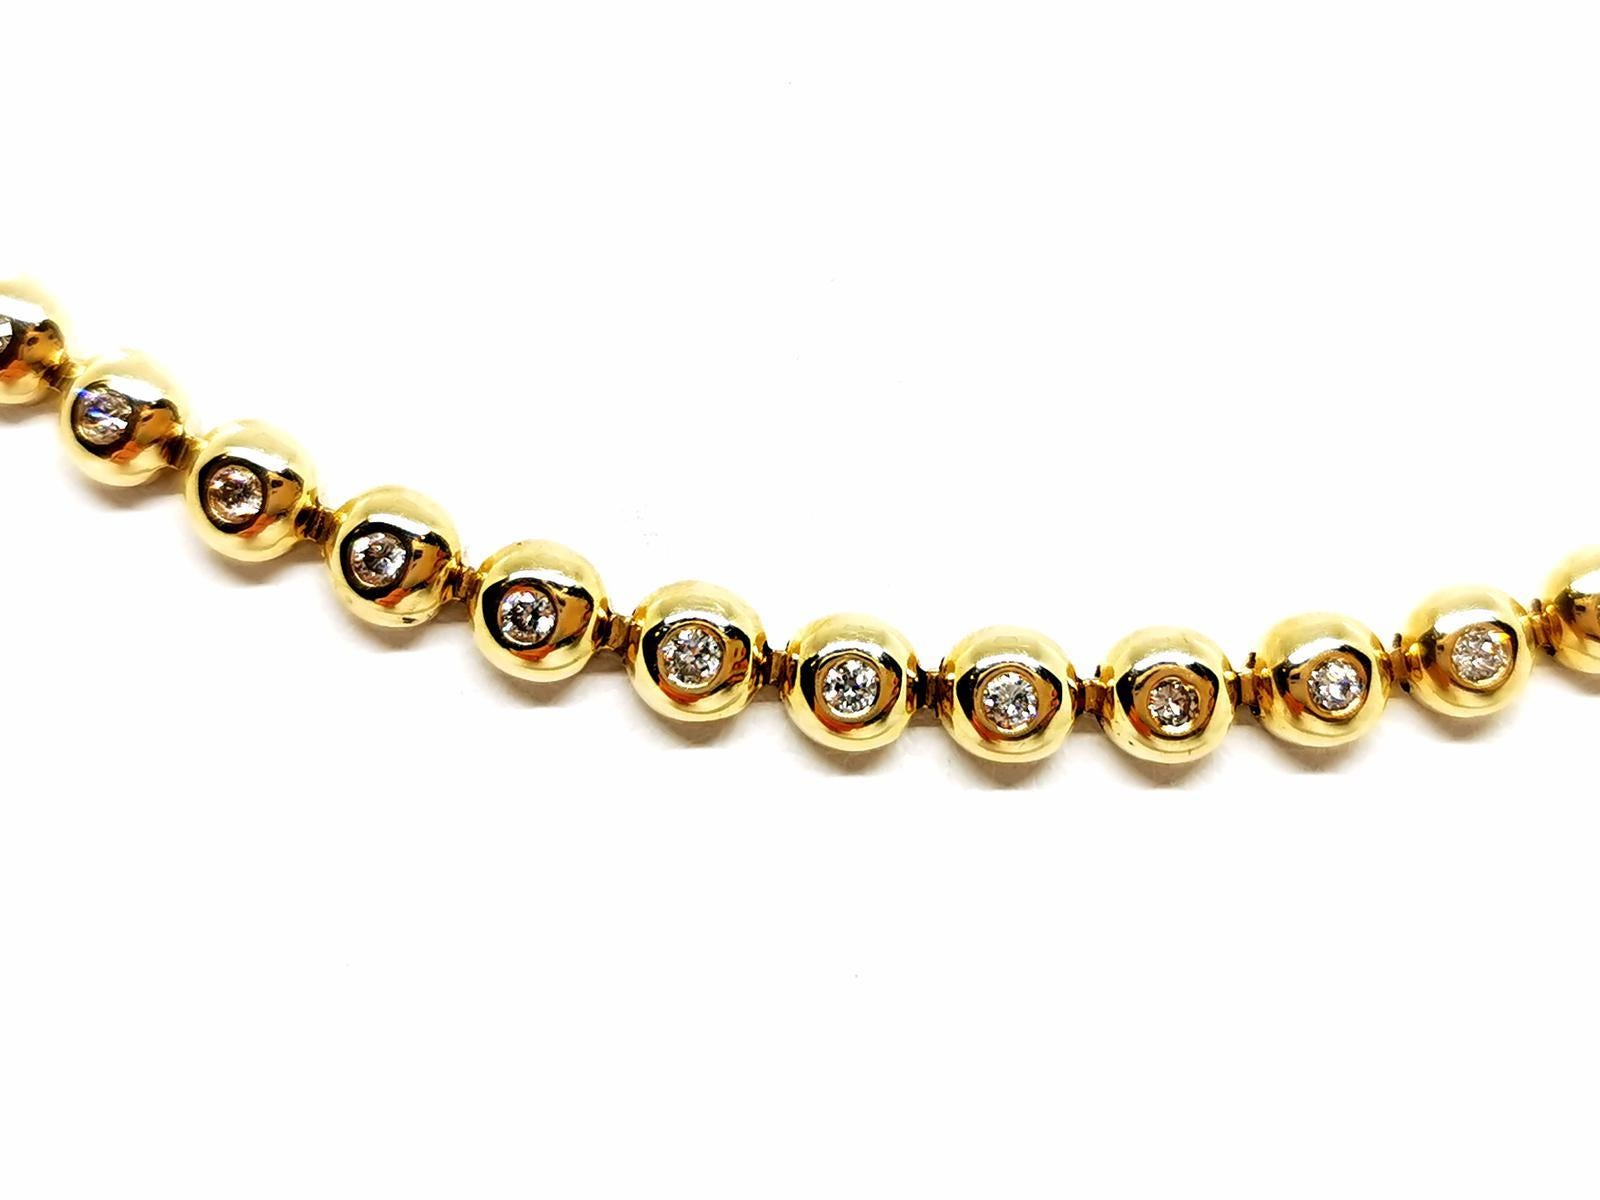 Gold necklace yellow 585 mils (14 carats). diamond line crimped closed. compound 83 brilliant cut diamonds. about 0.02 ct each diamond total weight: about 1.66 carats. length: 44 cm. width: 0.48 cm. thickness: 0.25 cm. with eight safety clasp. total